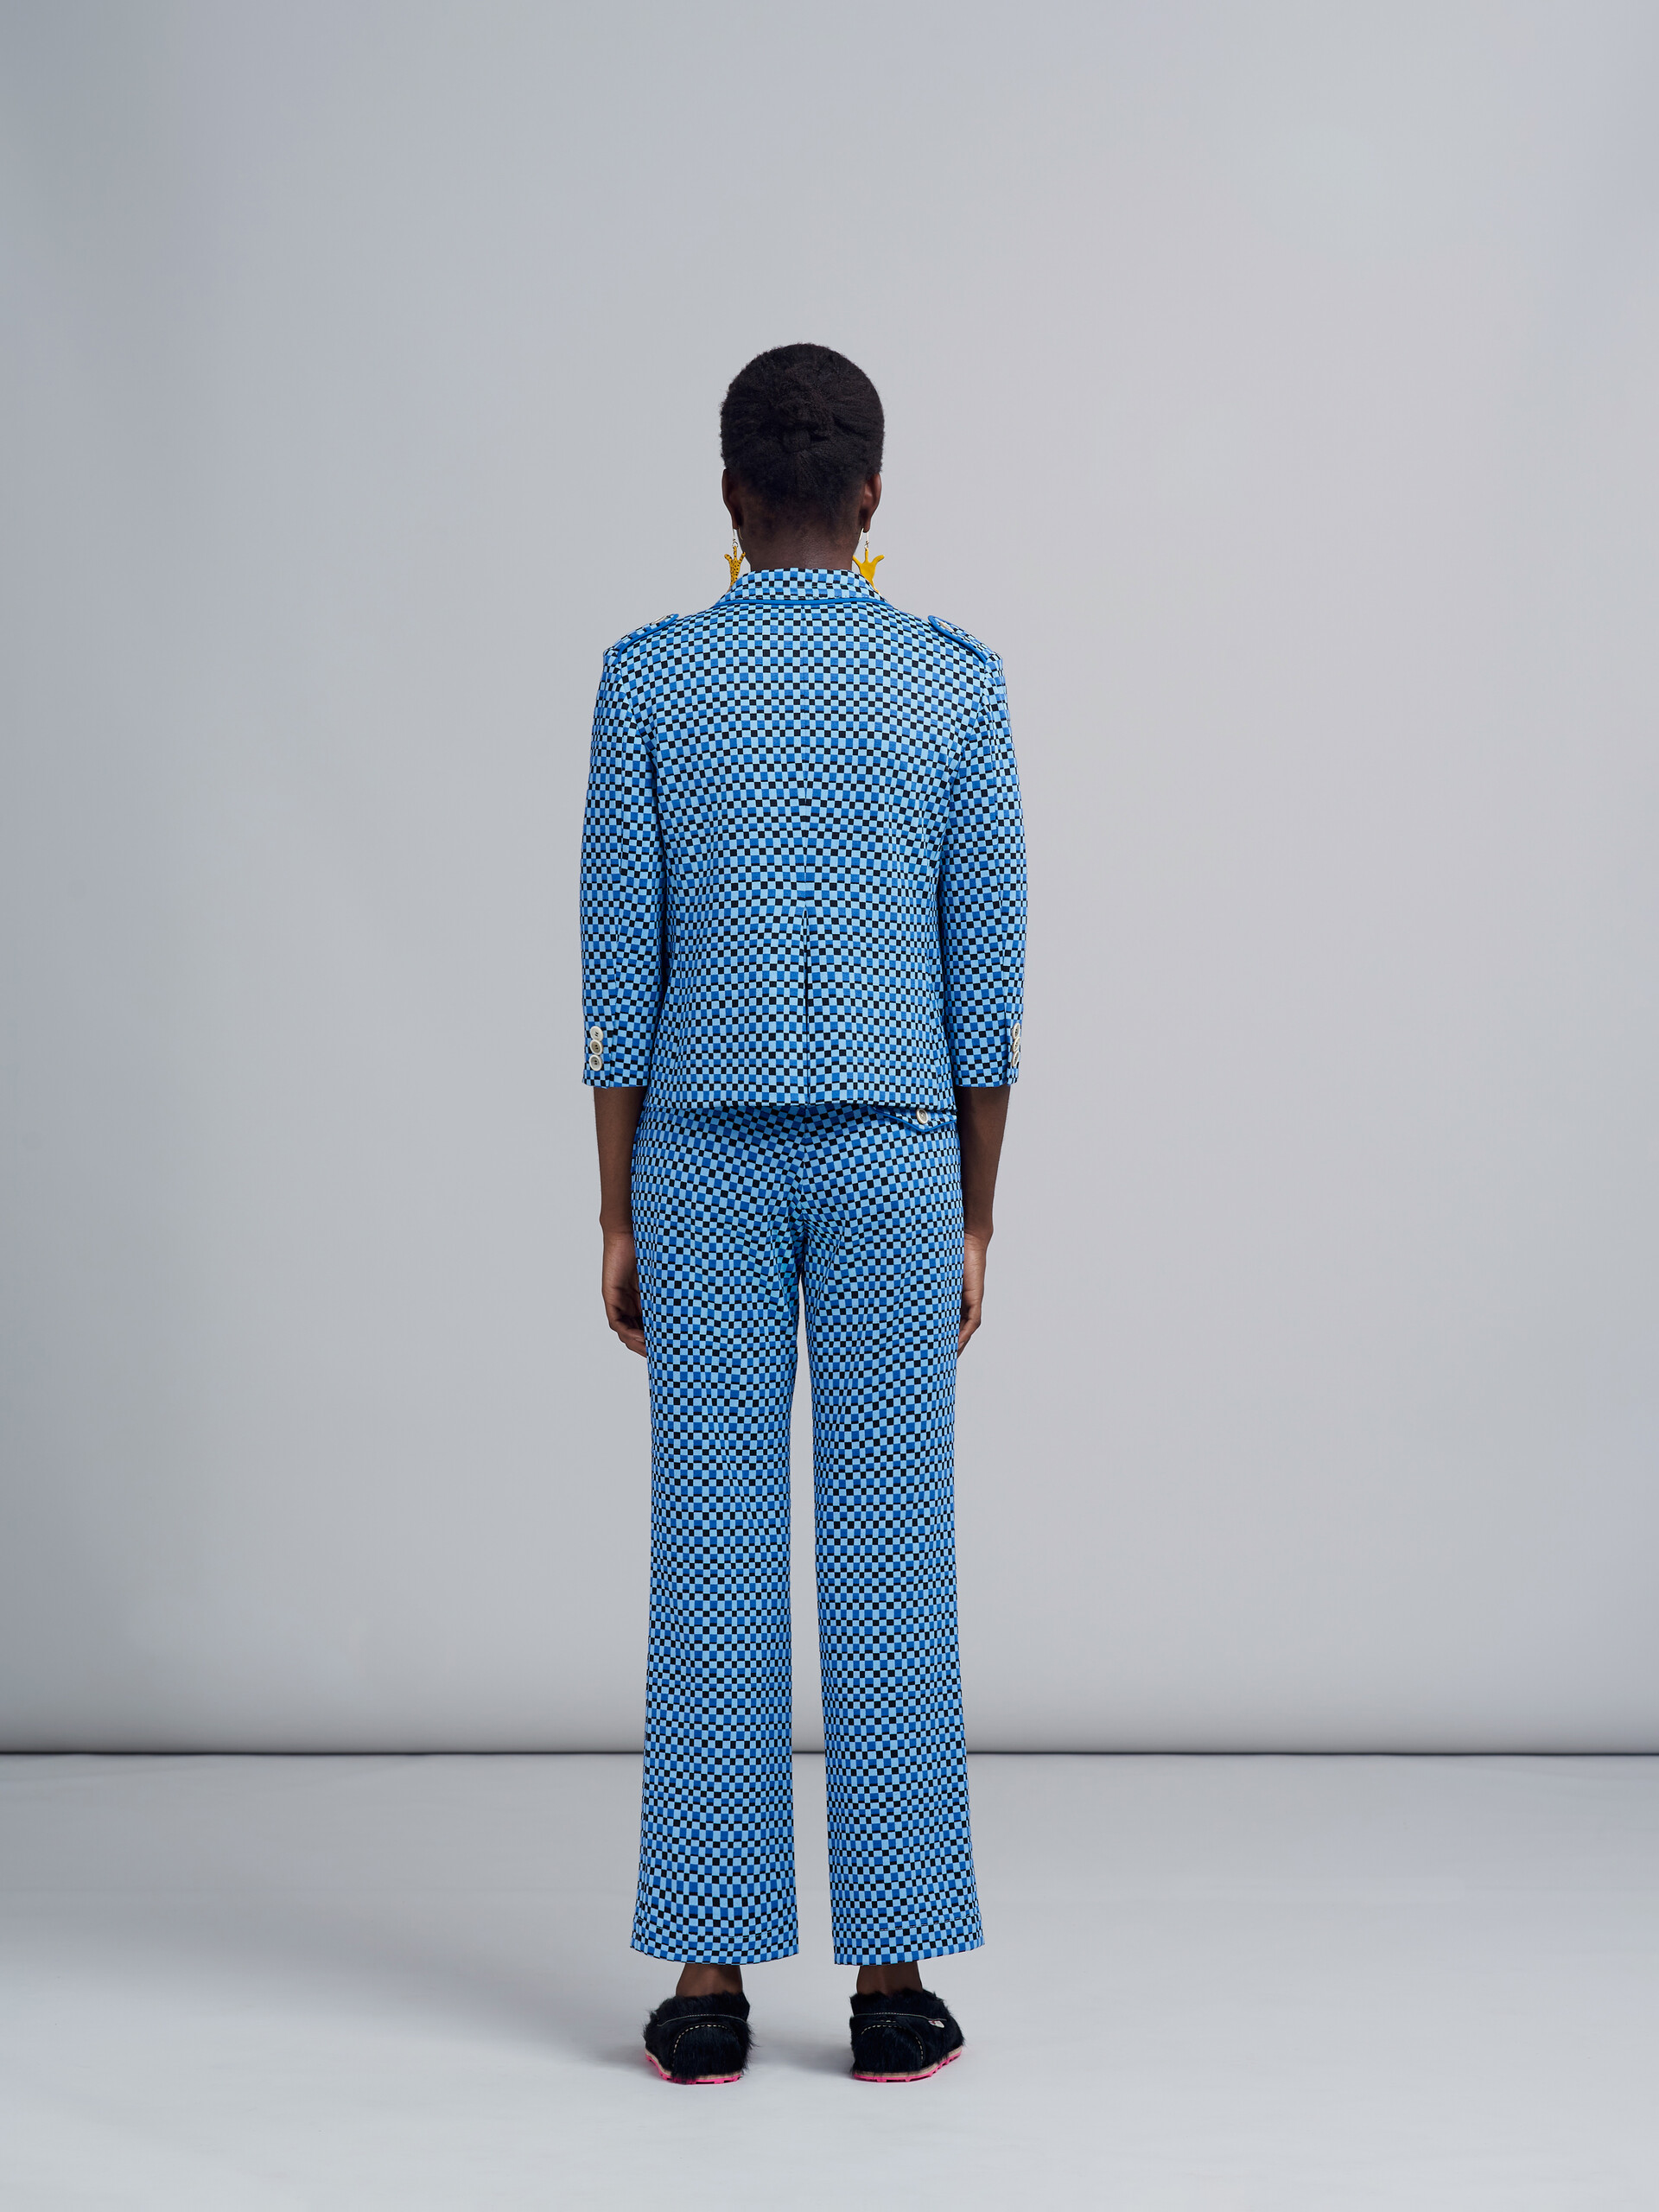 Jacquard jersey cropped trousers - Pants - Image 3